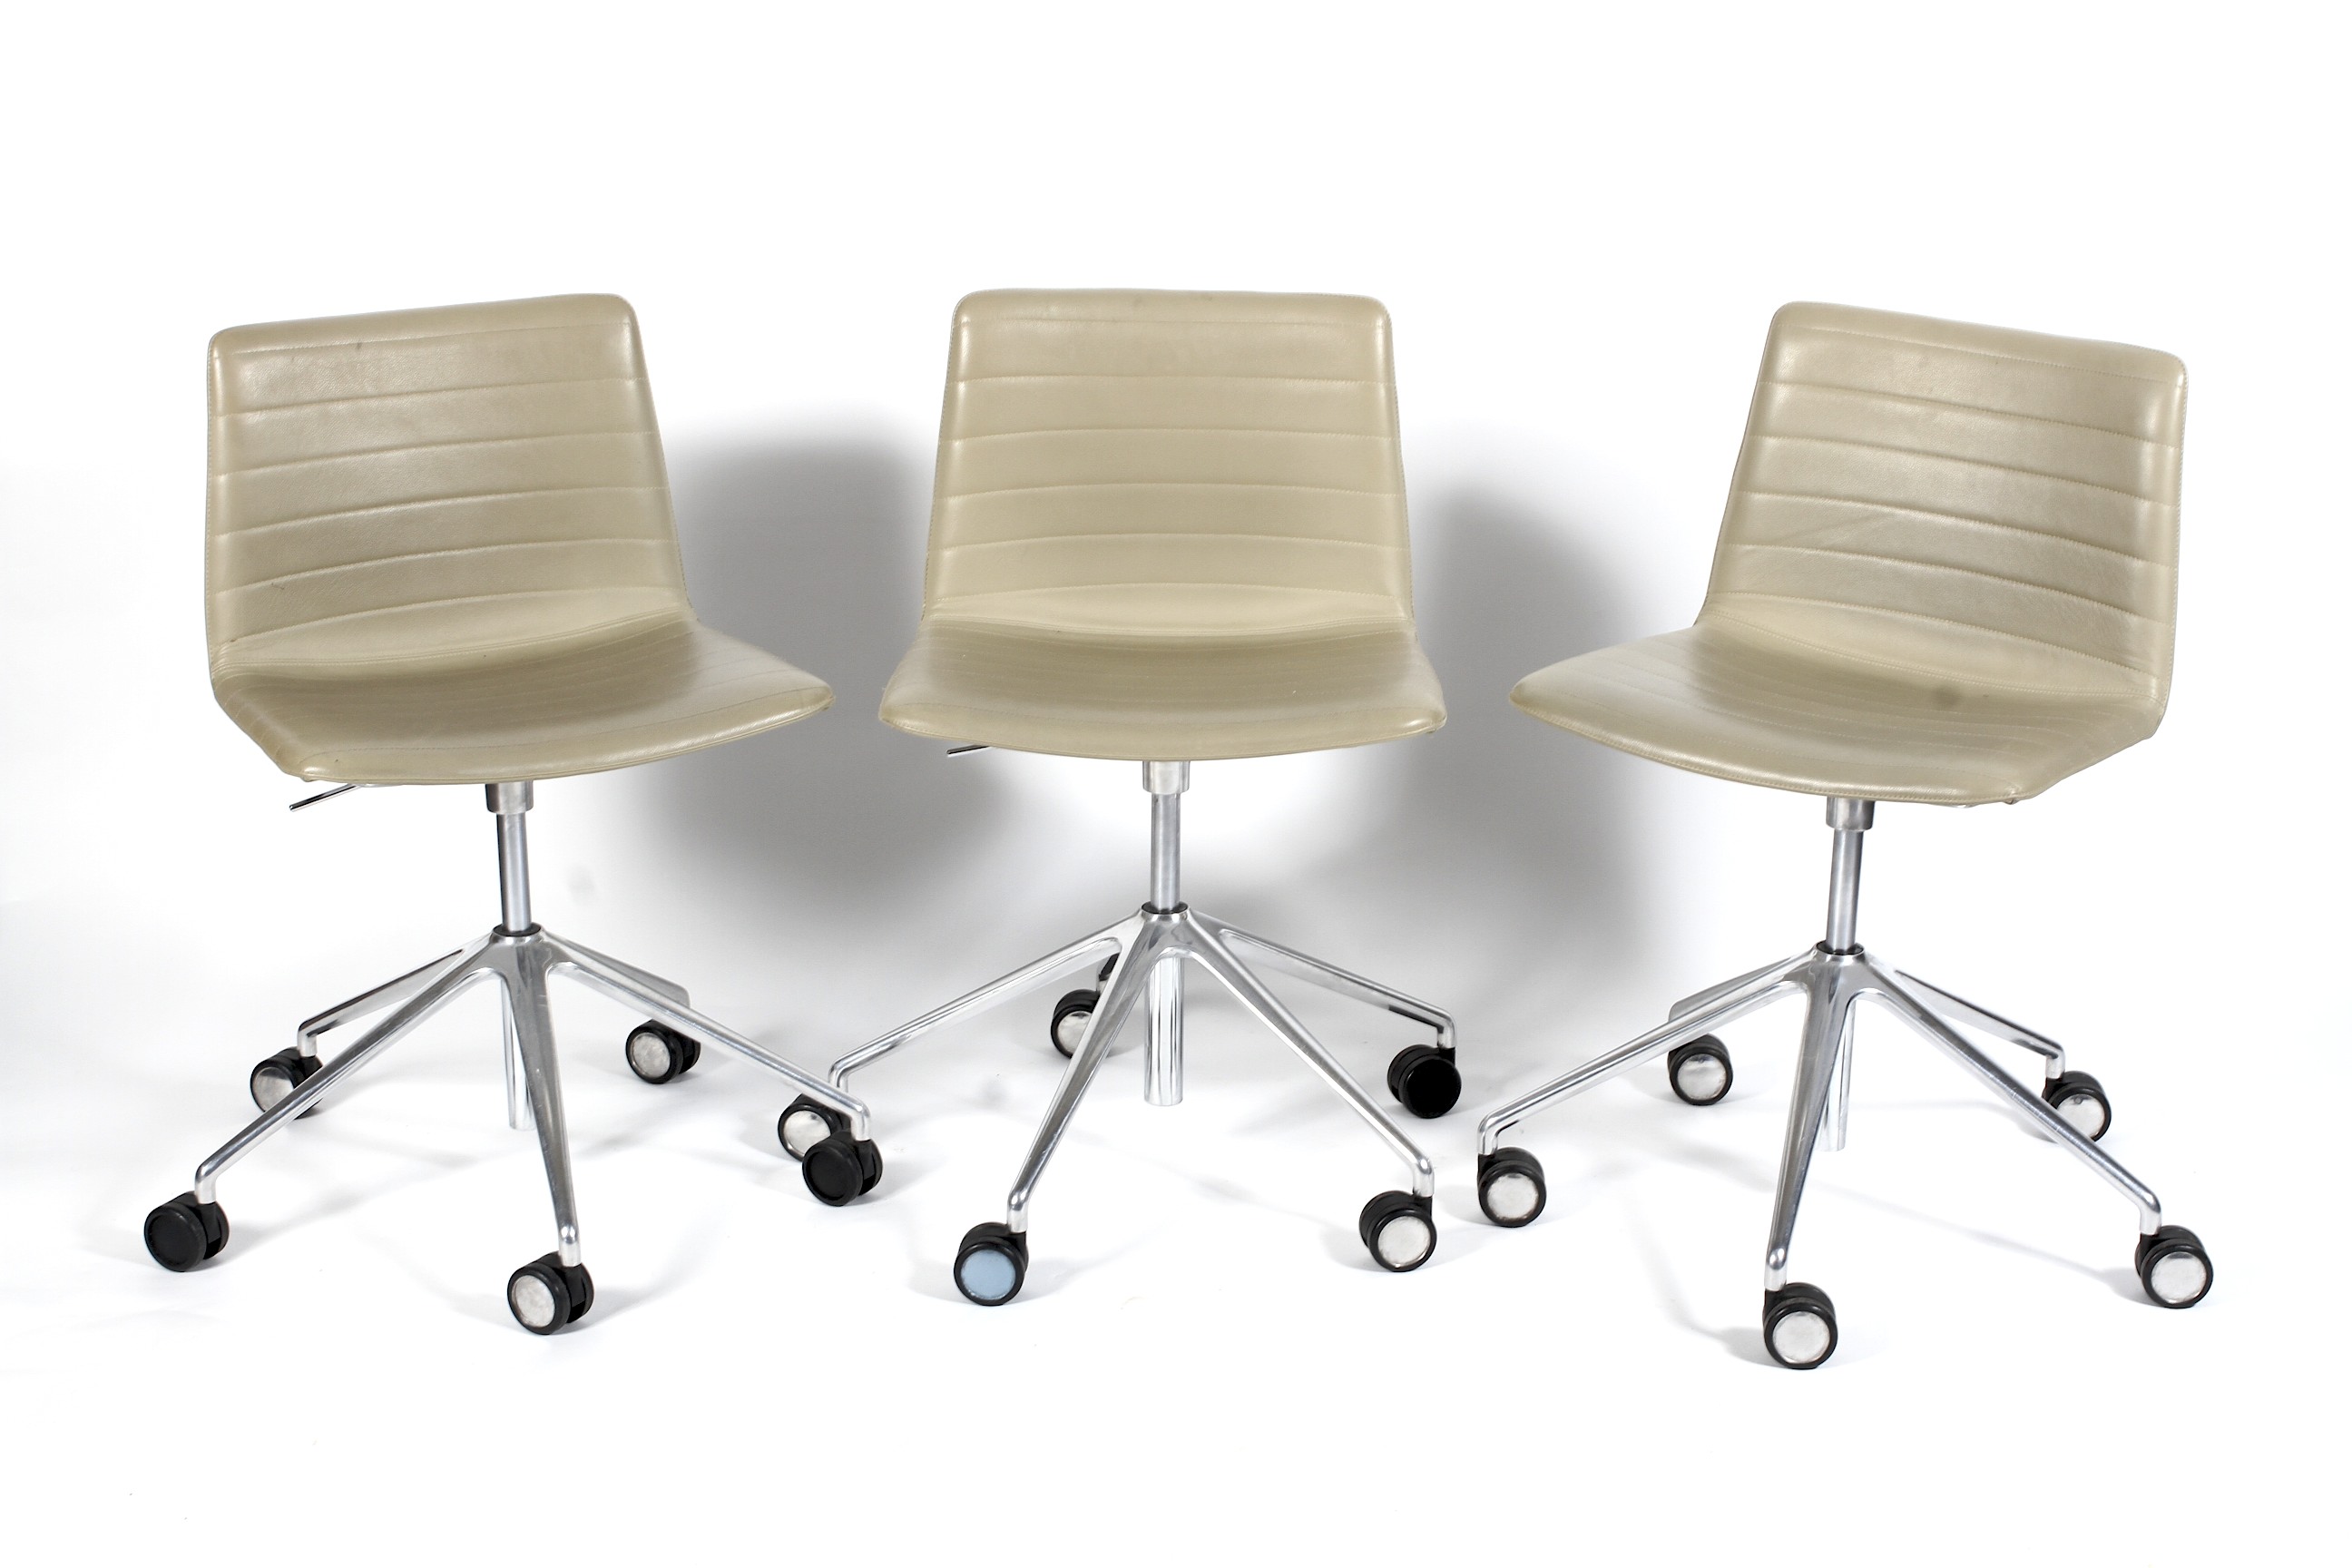 A set of three Andreu World (National Design Award Company 2007) faux leather swivel chairs,